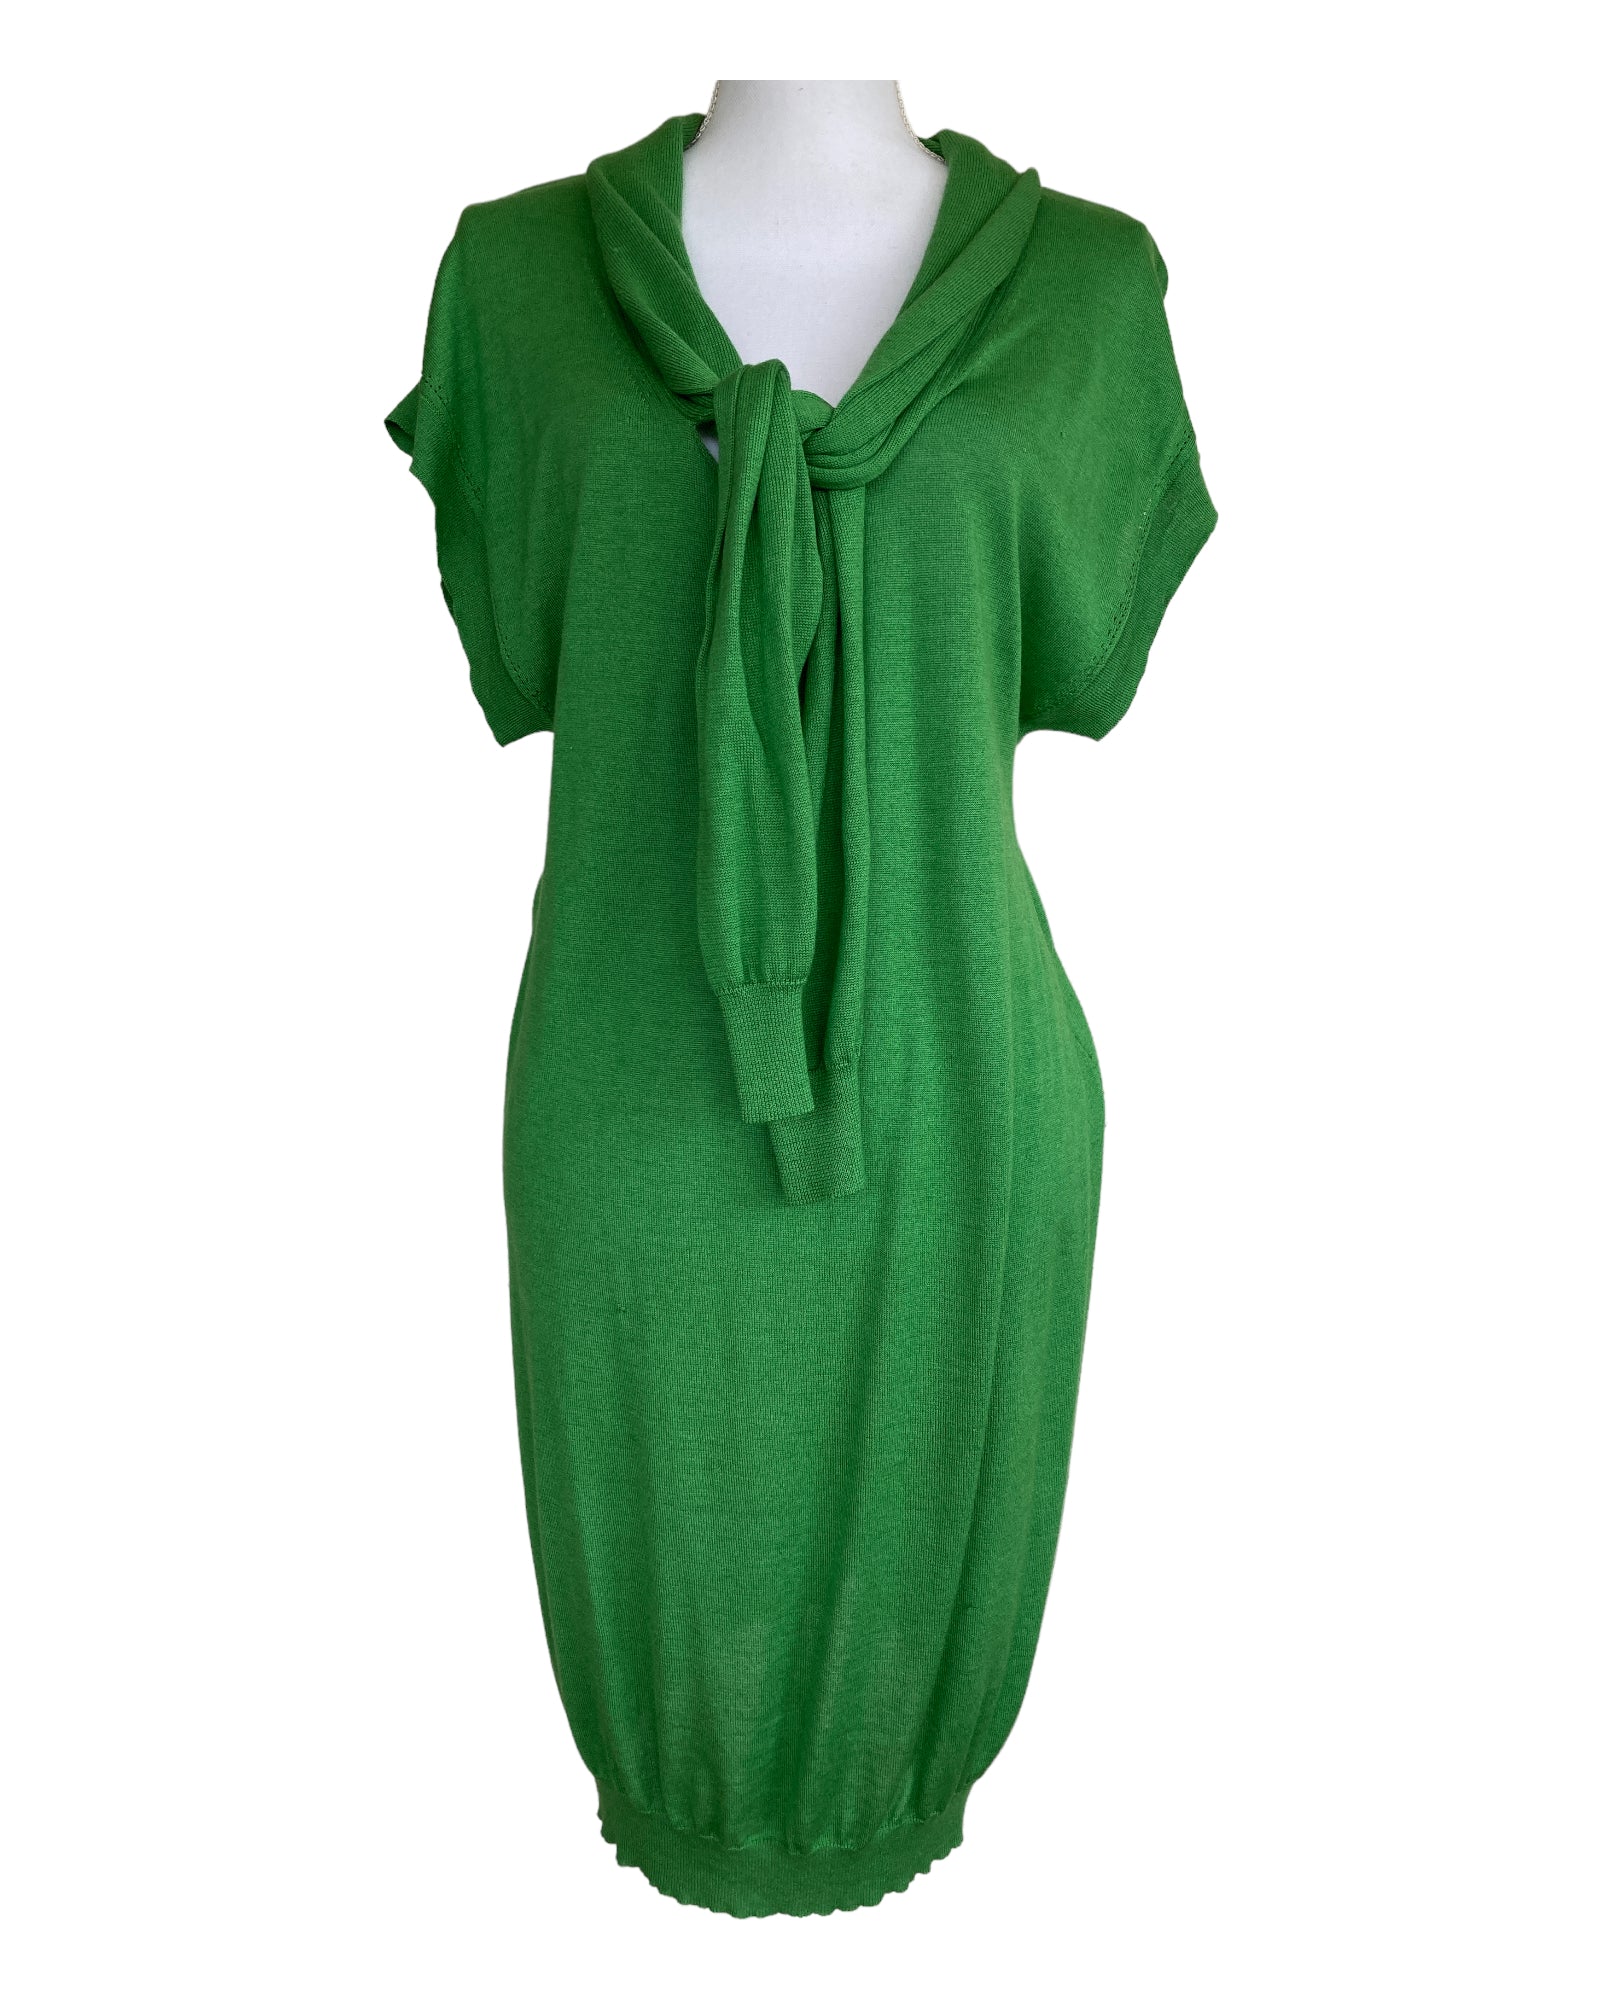 Thakoon Green Knit  with Tie Neck Dress, S